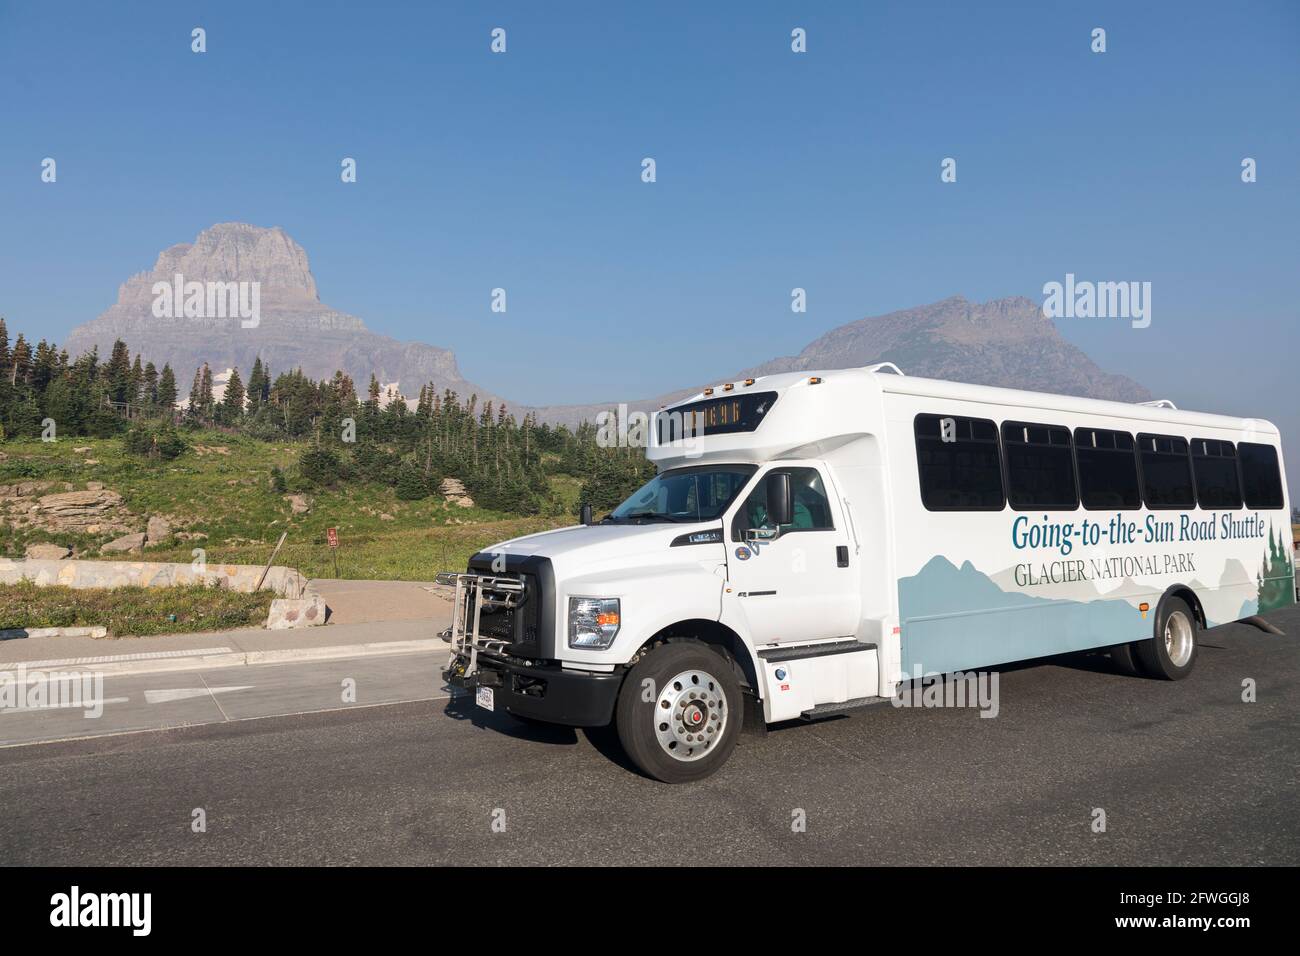 Going to the Sun road shuttle transport bus, Glacier National Park, Montana, USA Stock Photo